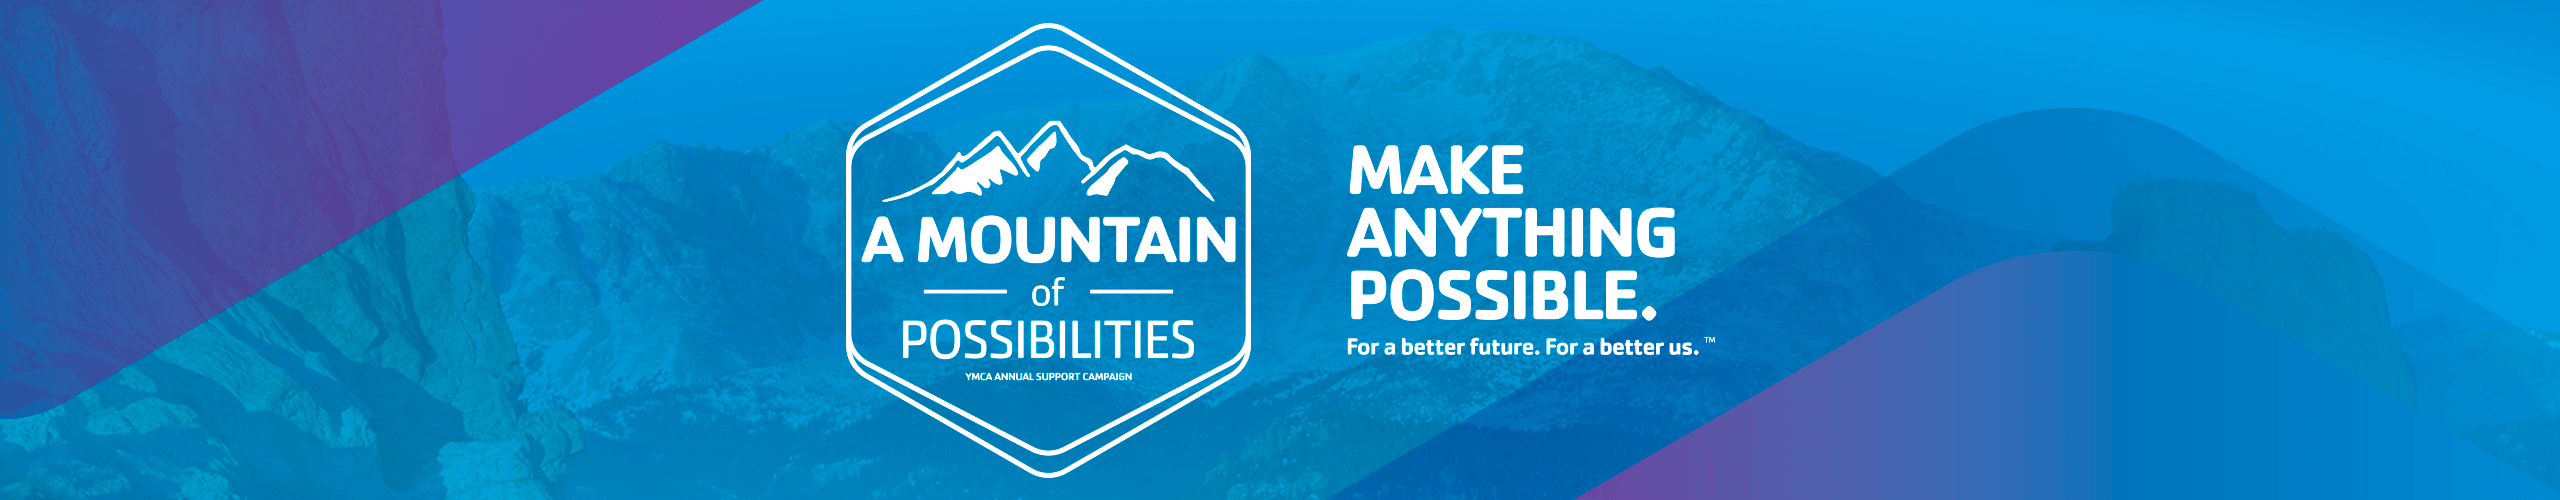 Annual Support Campaign banner with the text A mountain of possibilities. Make anything possible. For a better future. For a better us.